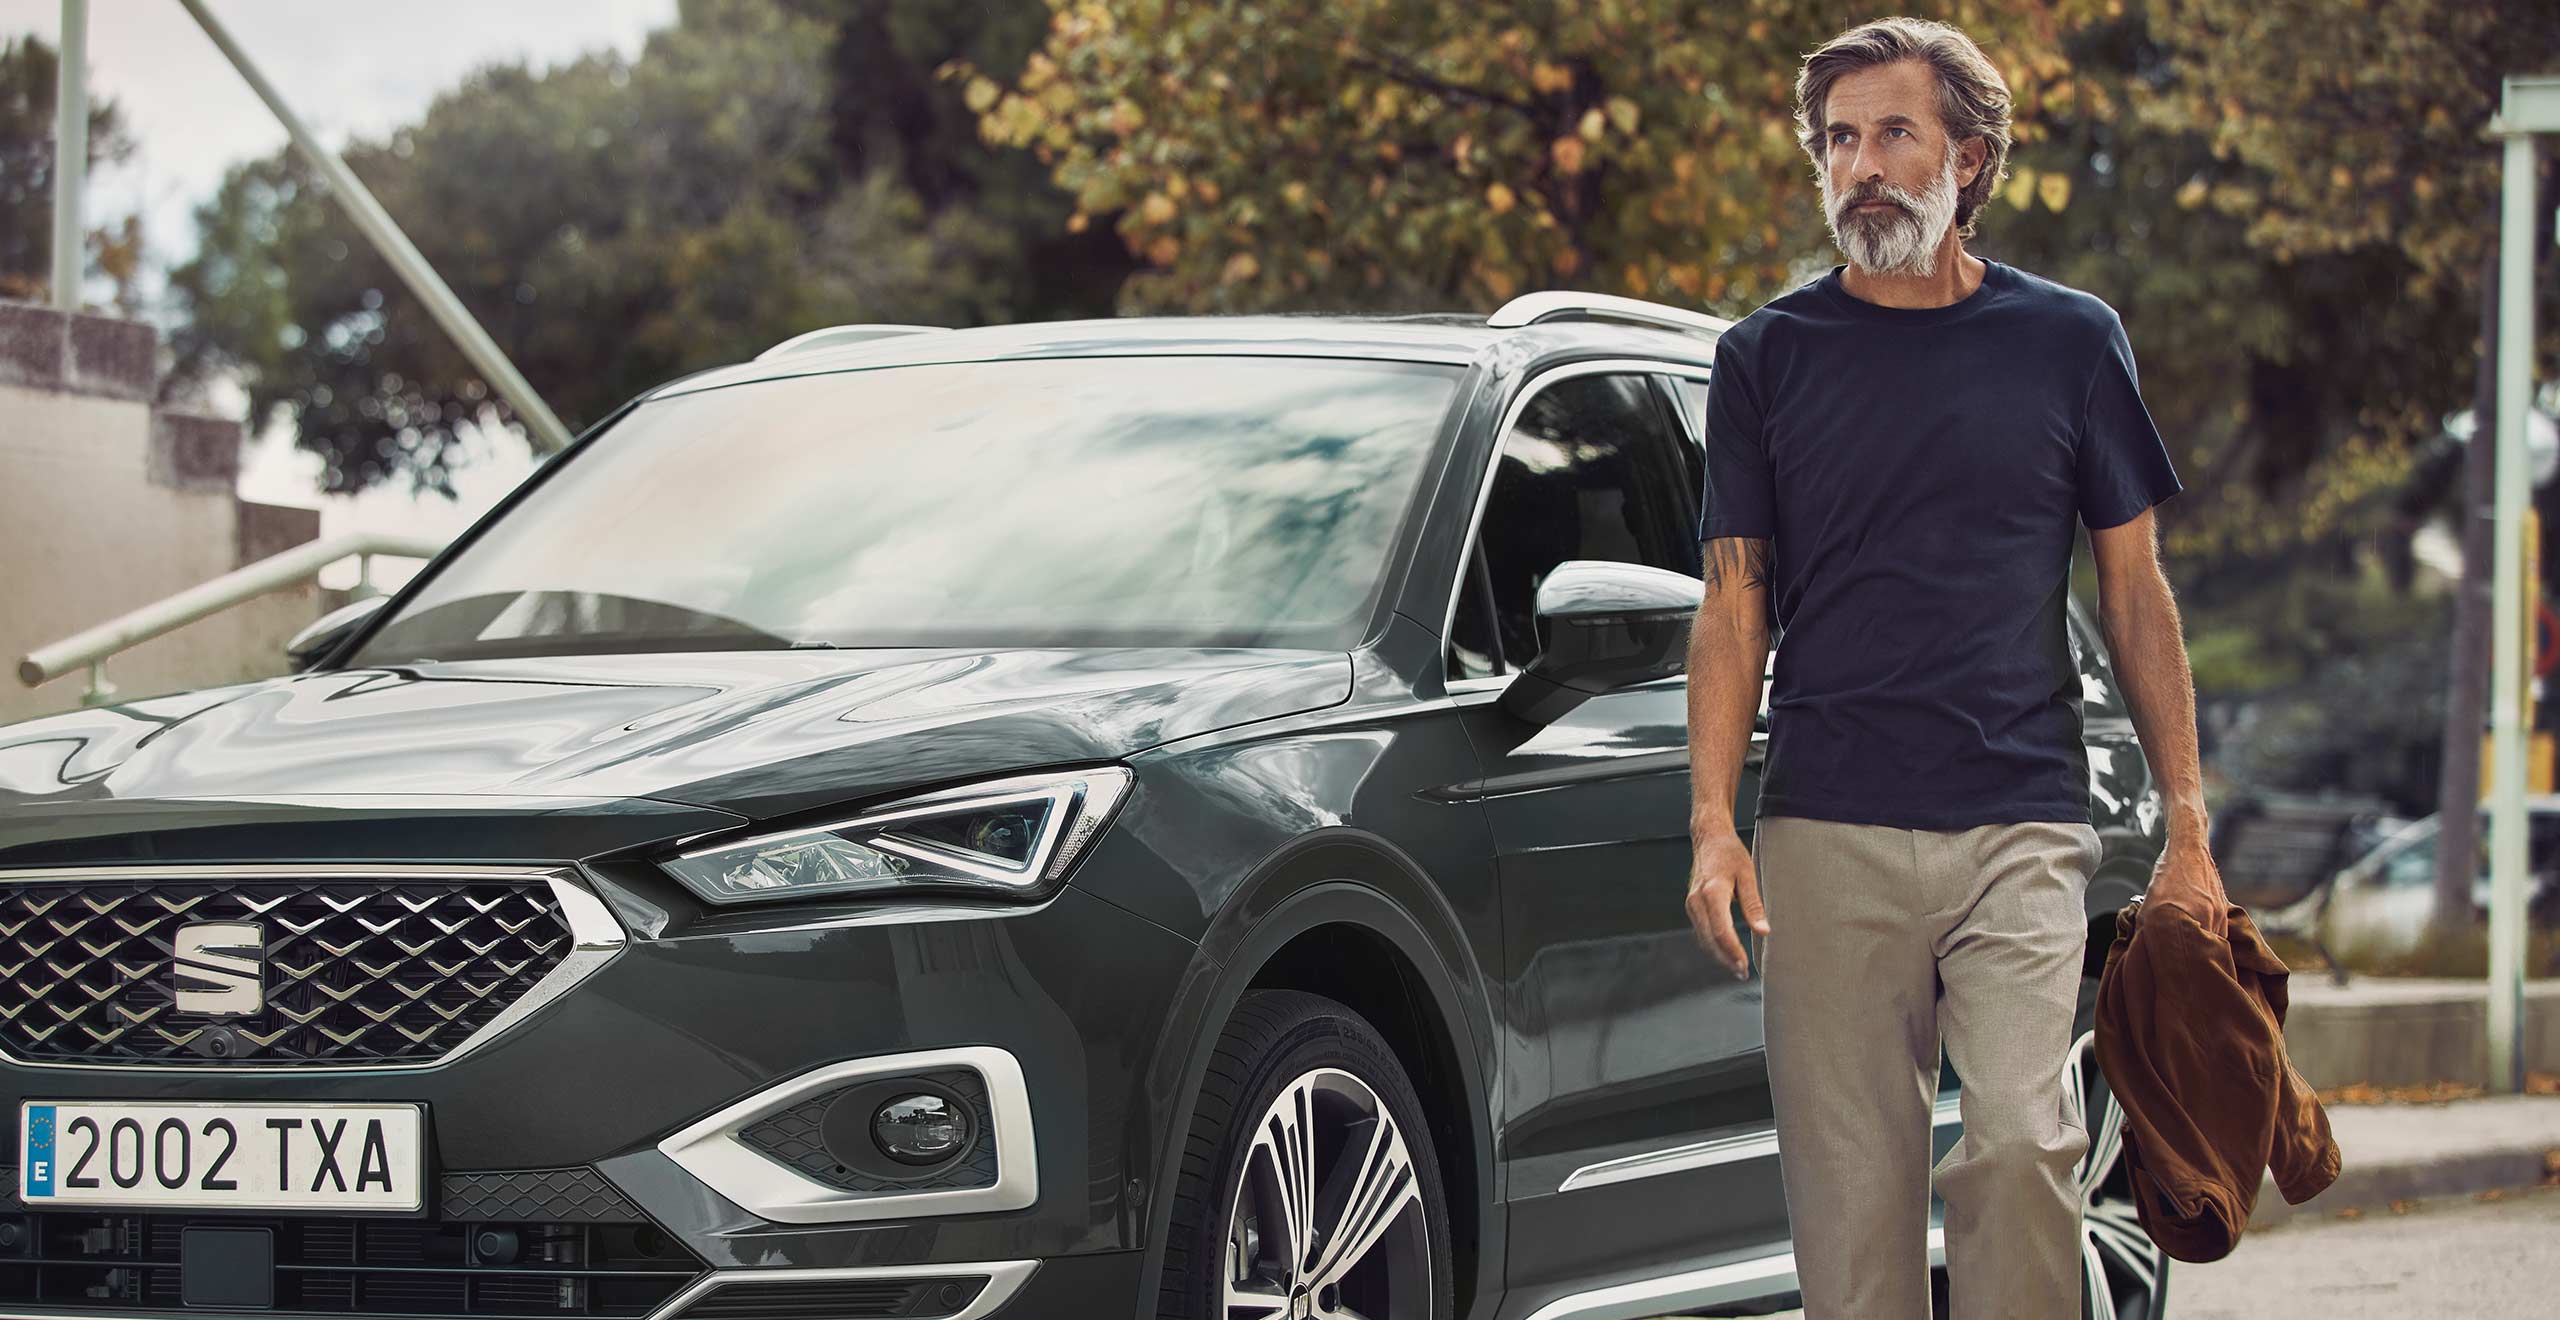 The new SEAT Tarraco dark camouflage with machined alloy wheels